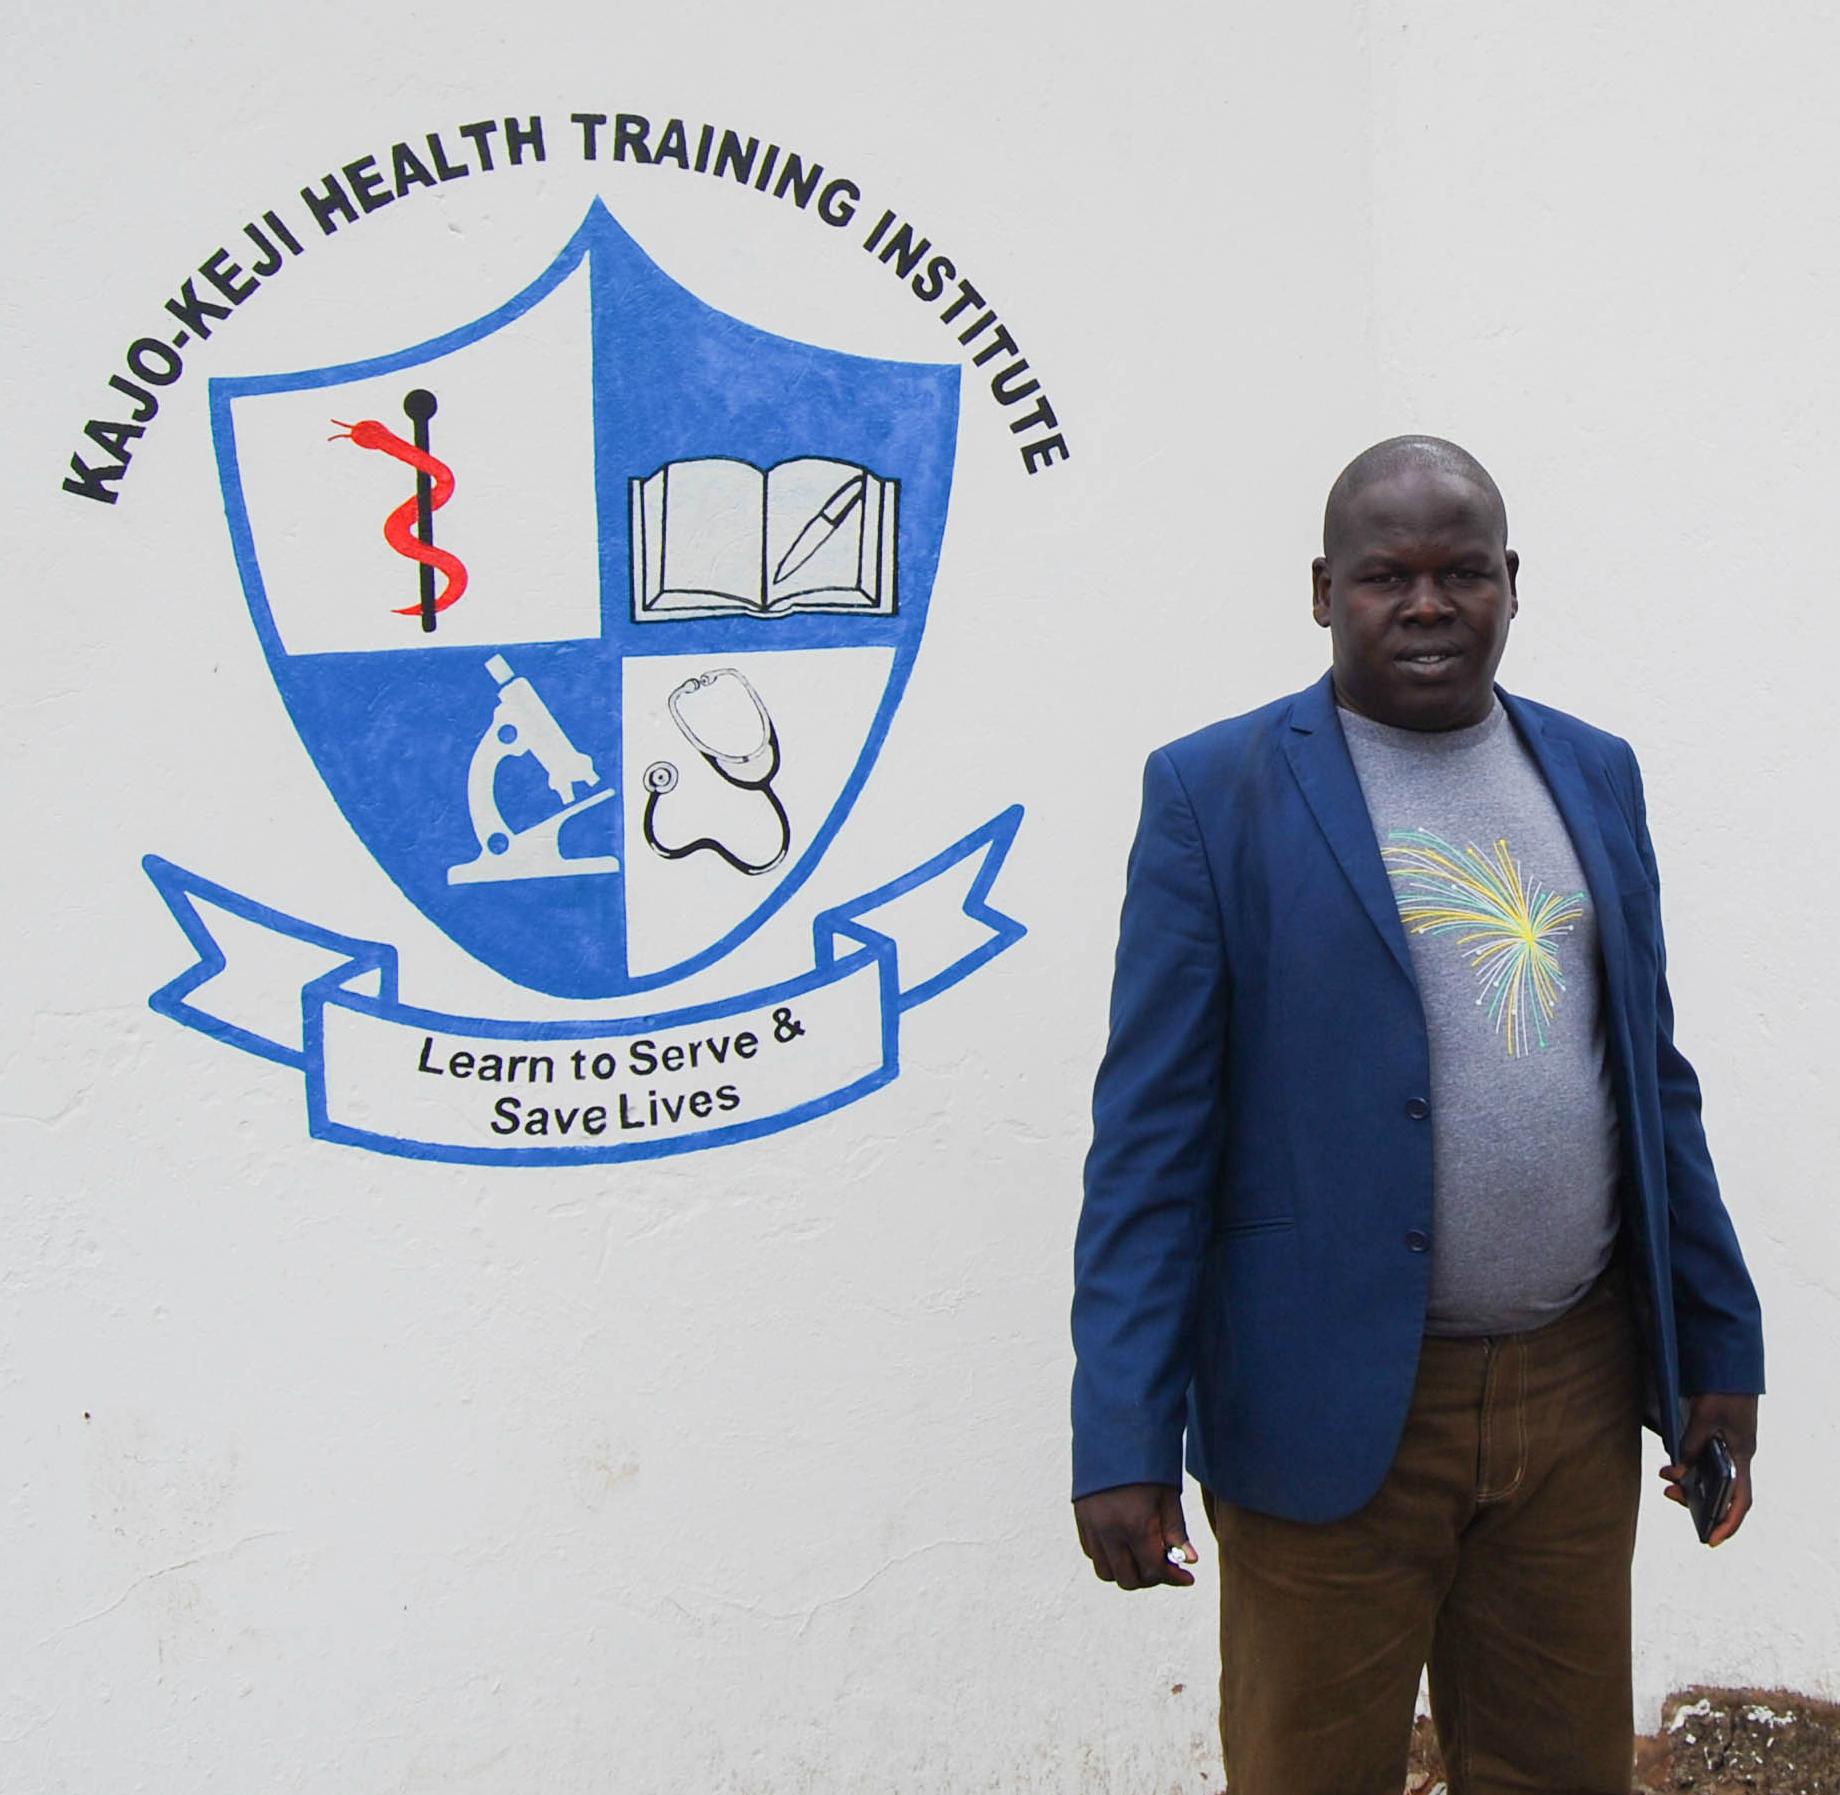 Lou Louis Koboji, the founder and director of the Kajo Keji Health Training Institute, stands outside the school’s new location in Arua, Uganda.